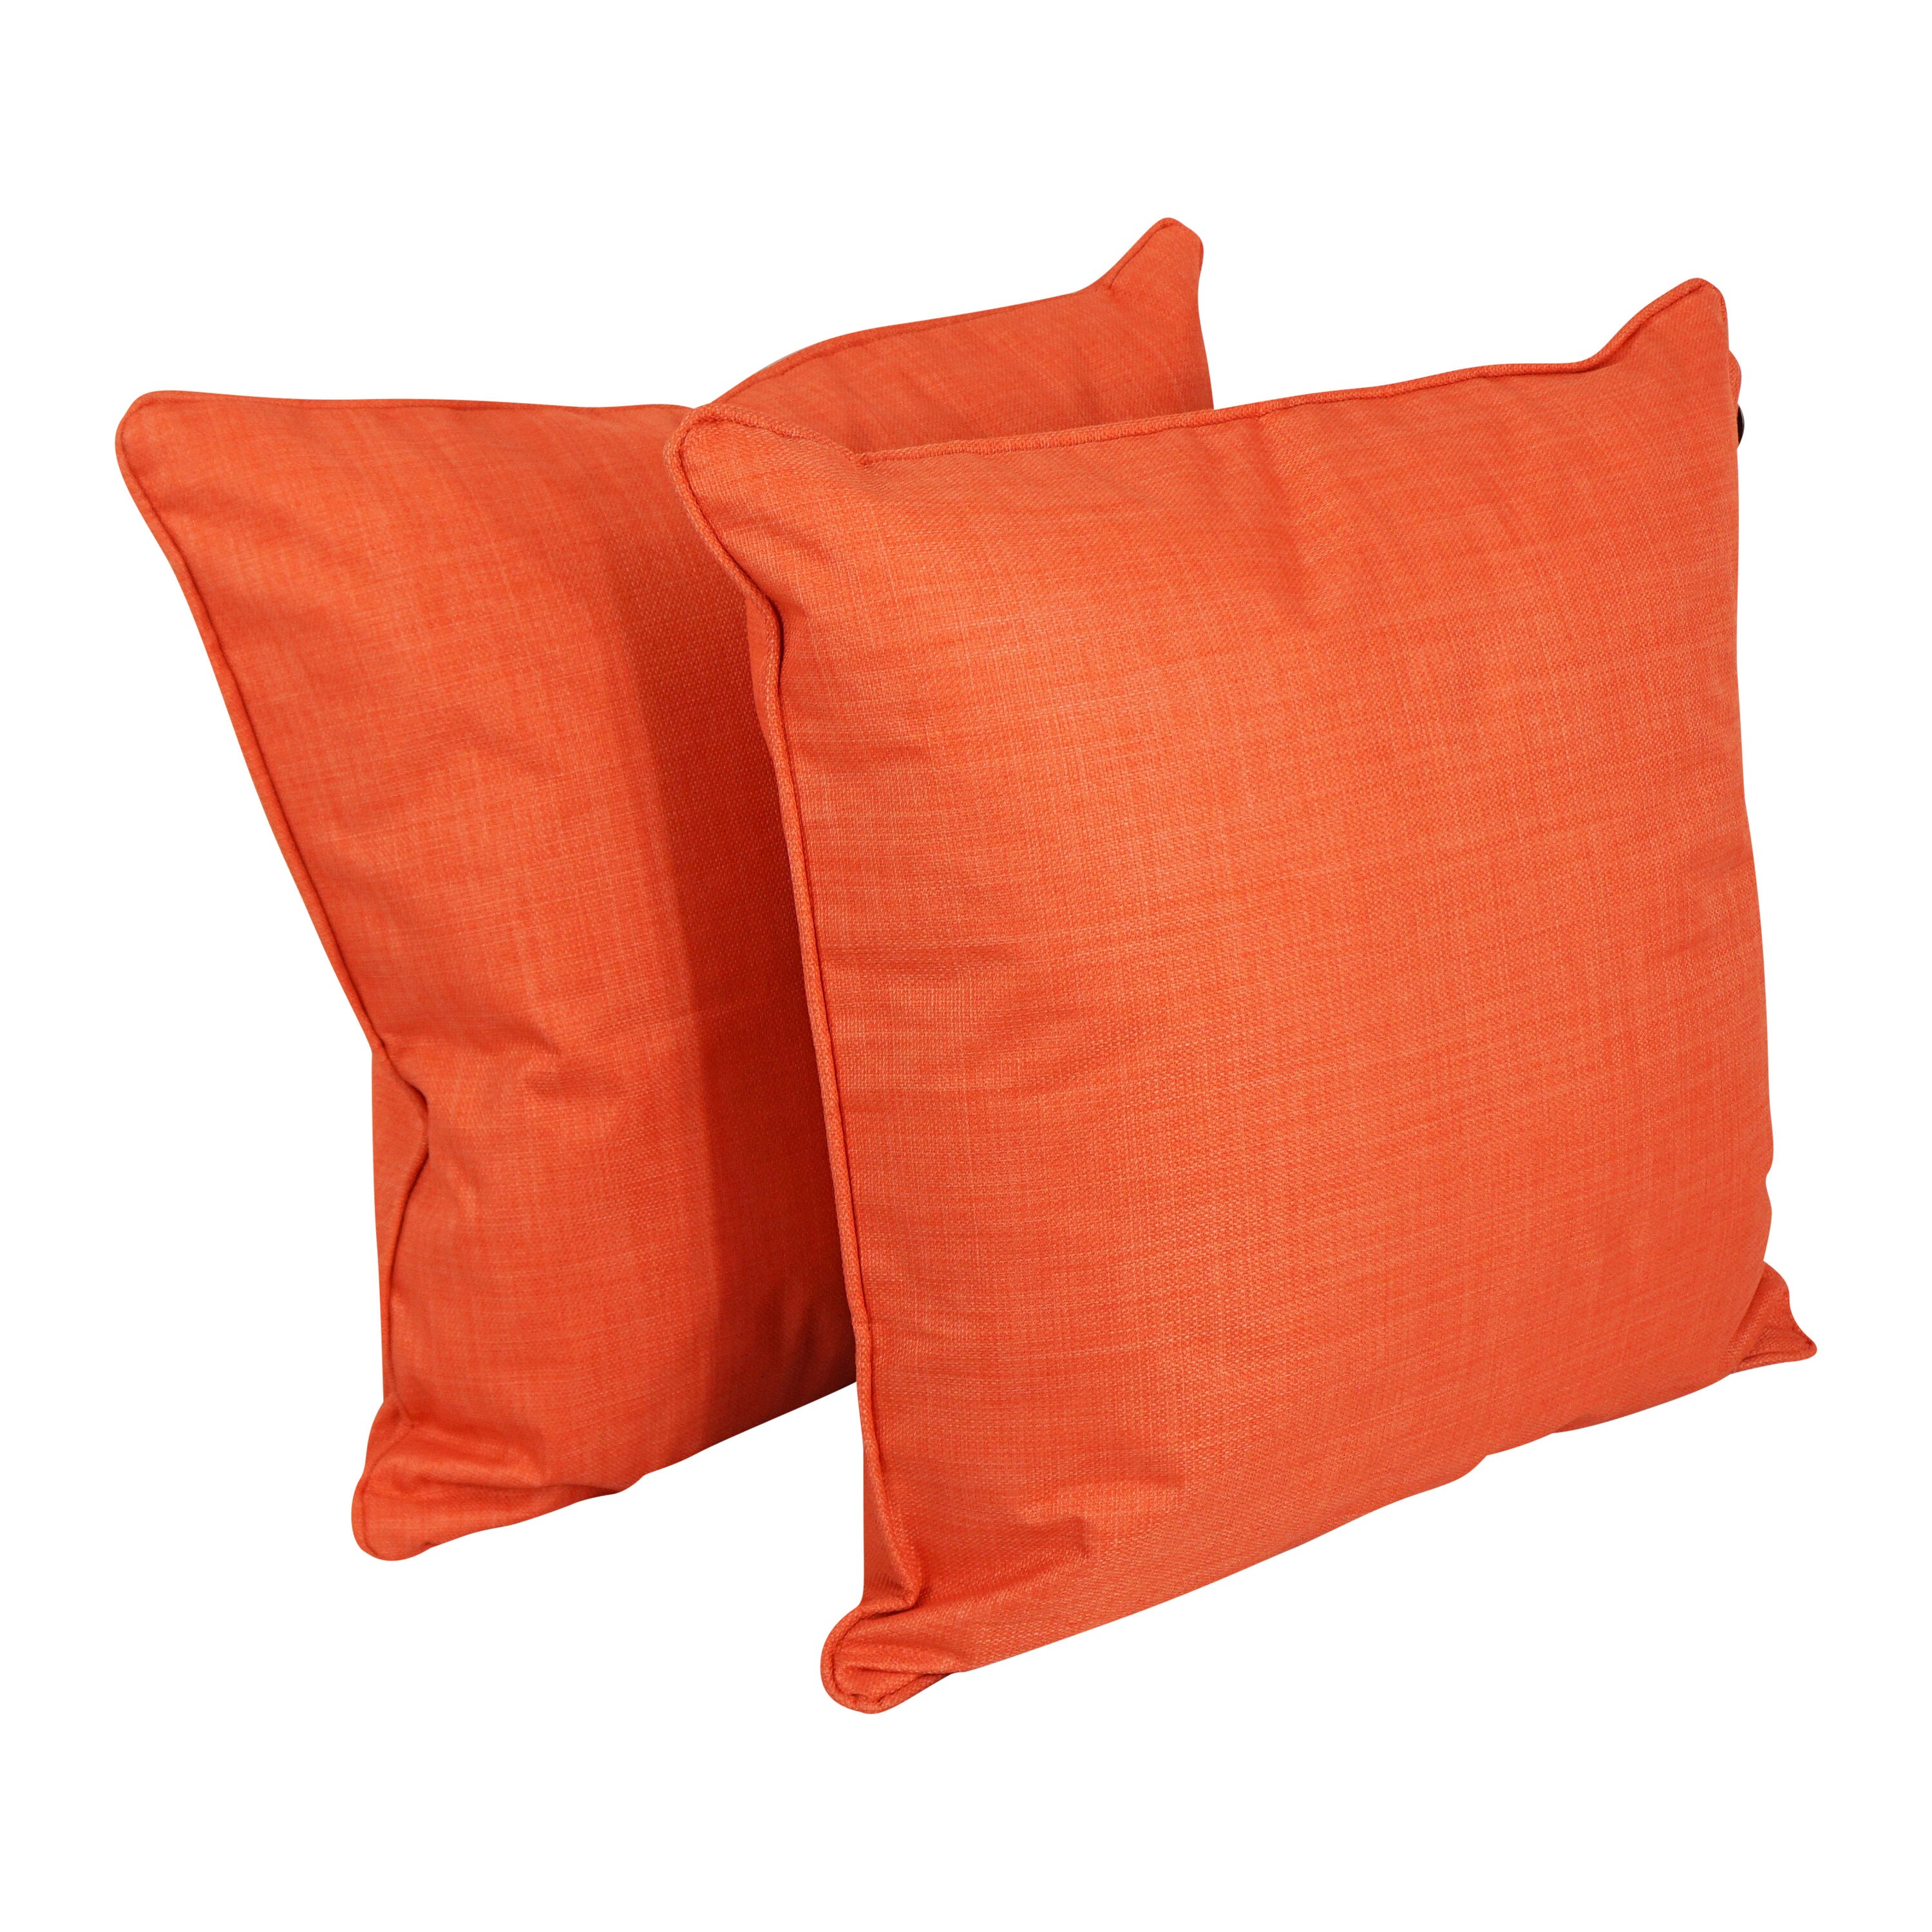 Flowershave357 Outdoor Pillow Covers Decorative Pillows Solid Orange Pillows Outdoor Pillow Terrasol Outdoor Sunsetter Orange 